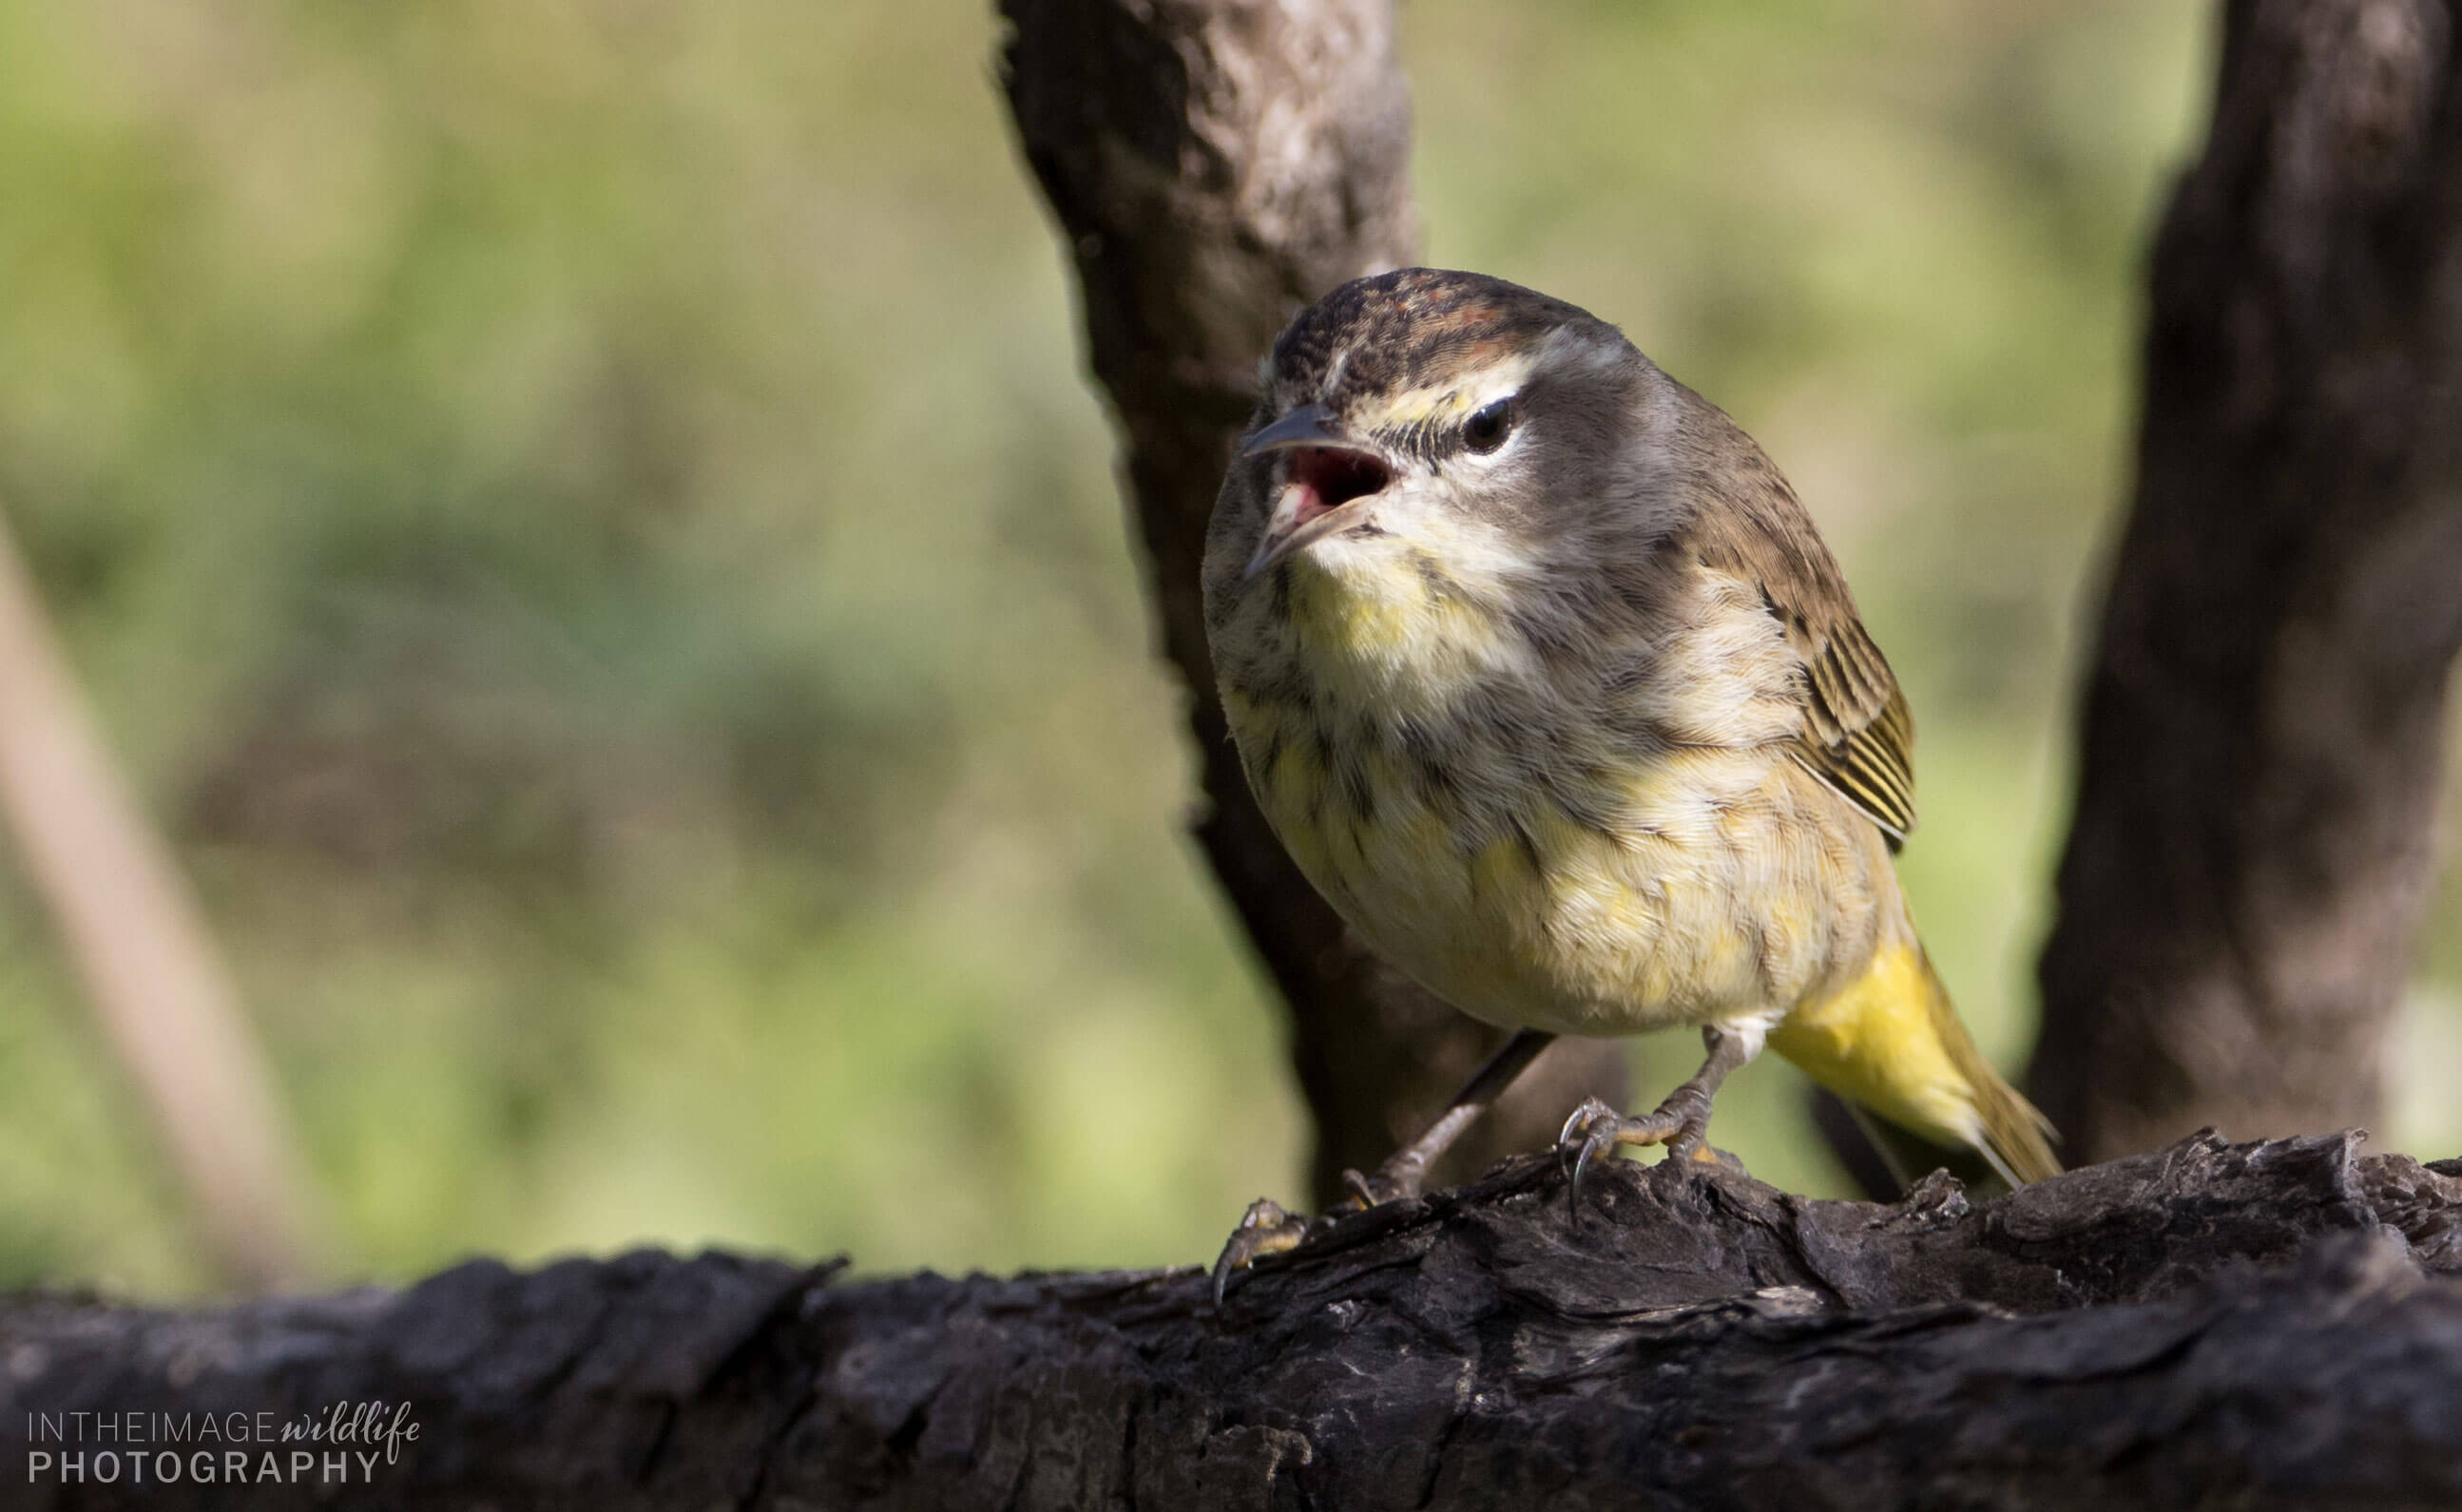 In the Image Wildlife Photography Little Bird Singing